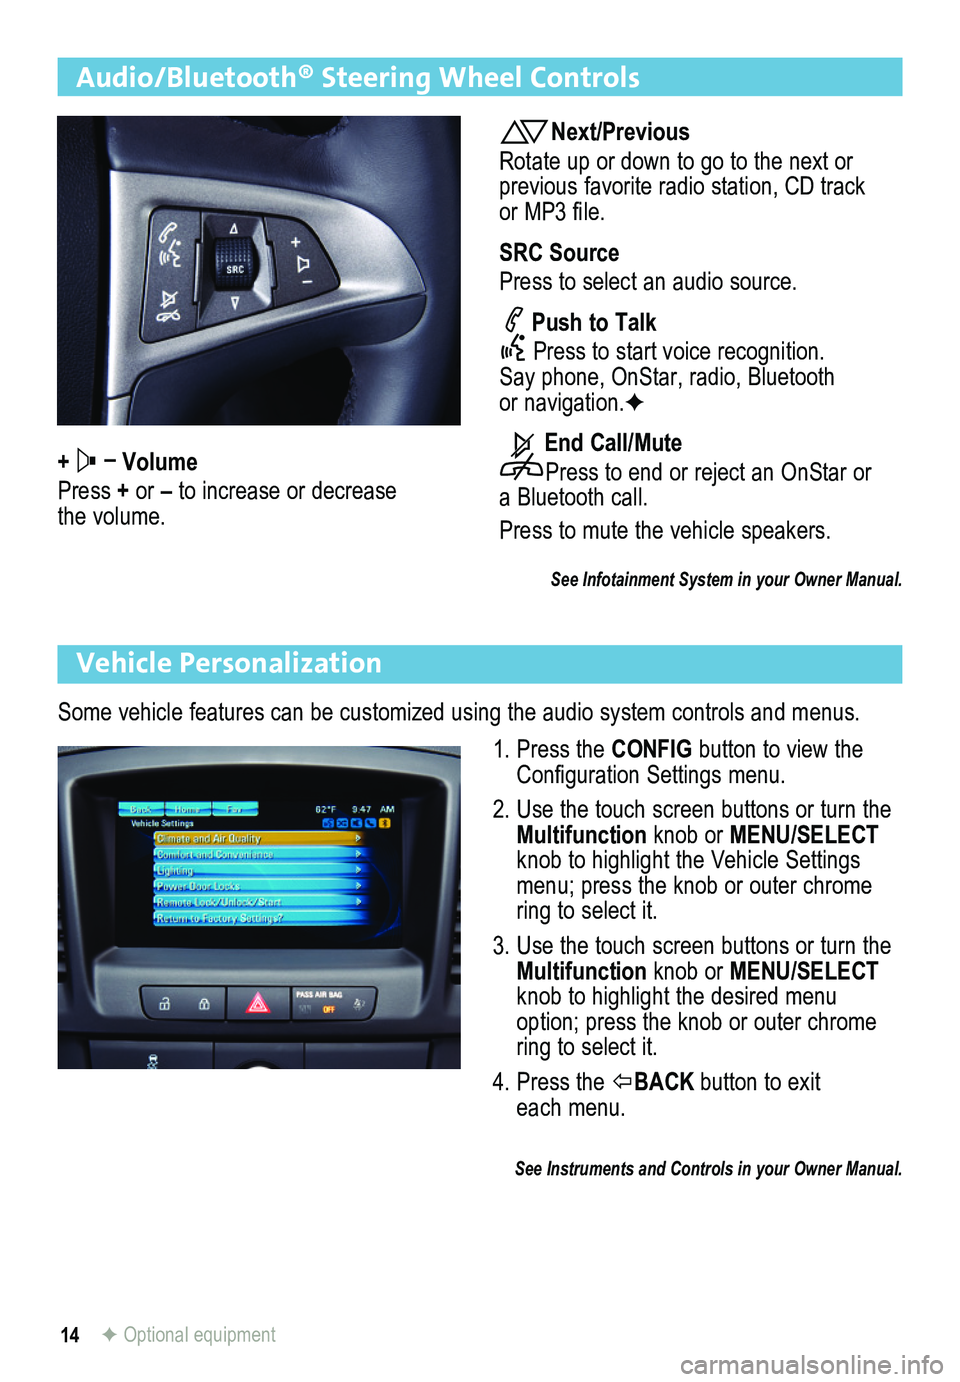 BUICK REGAL 2013  Get To Know Guide 14
Audio/Bluetooth® Steering Wheel Controls
+  – Volume
Press + or – to increase or decrease the volume.
Next/Previous
Rotate up or down to go to the next or  previous favorite radio station, CD 